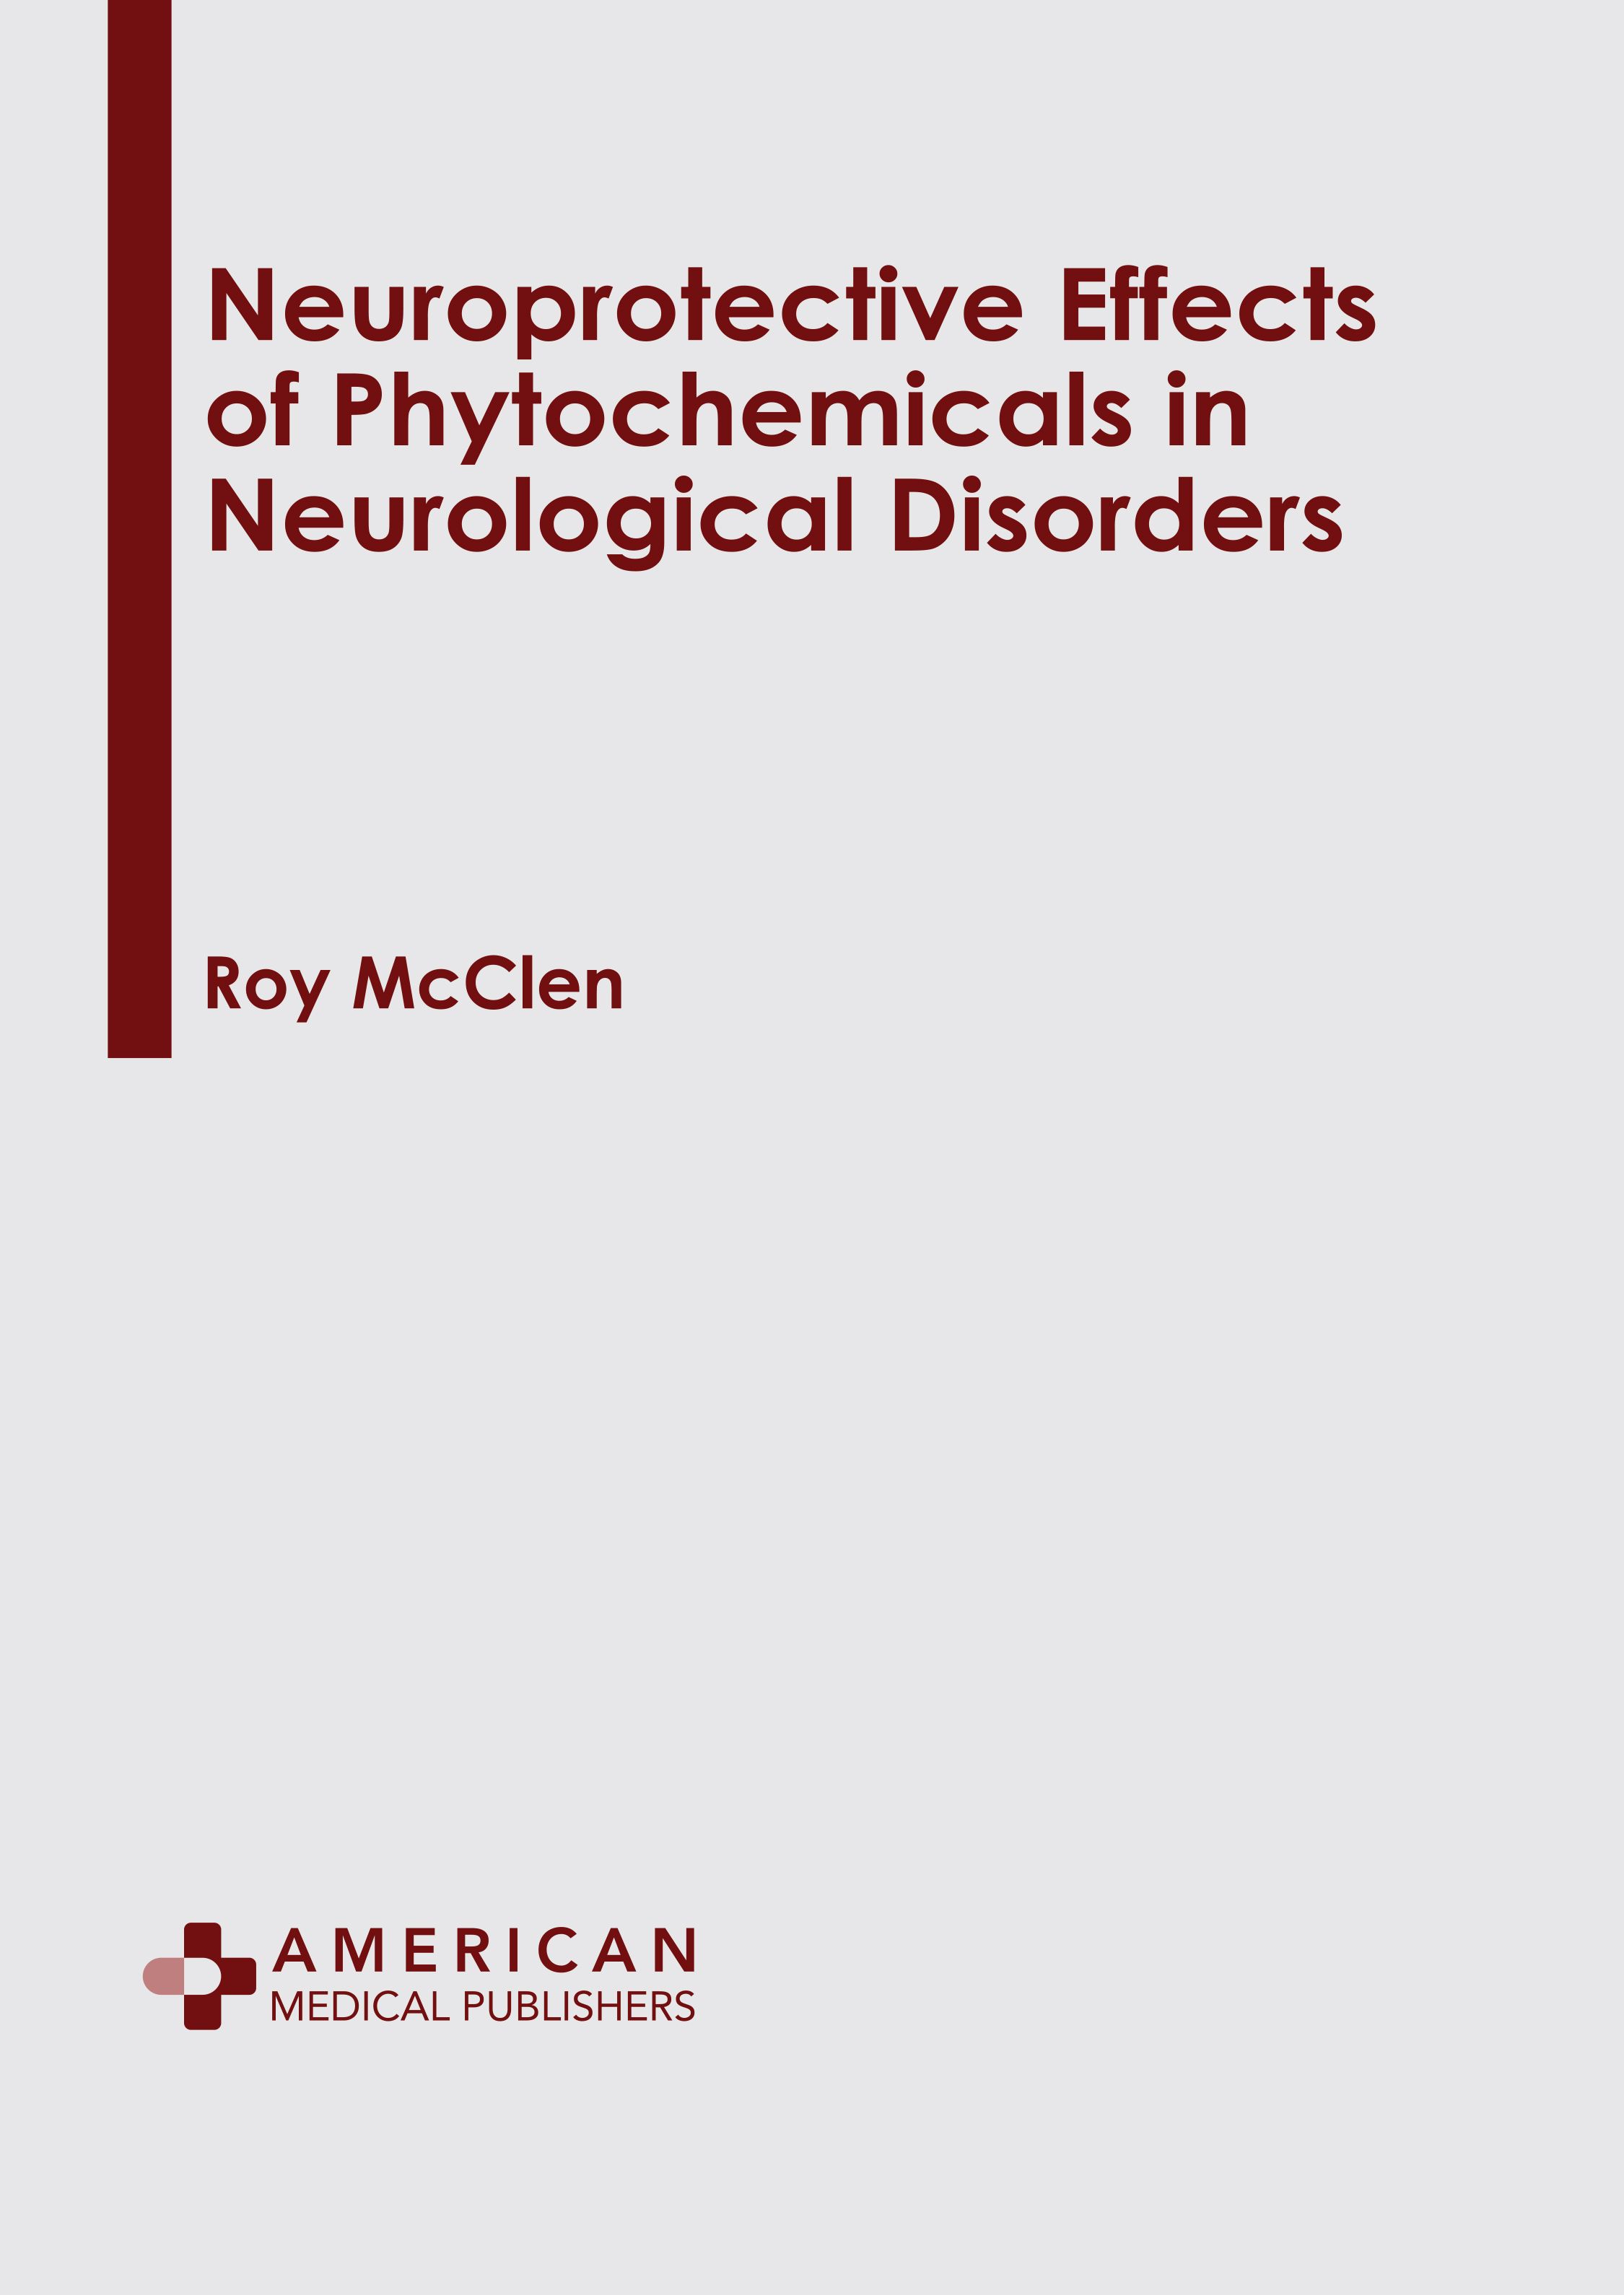 NEUROPROTECTIVE EFFECTS OF PHYTOCHEMICALS IN NEUROLOGICAL DISORDERS